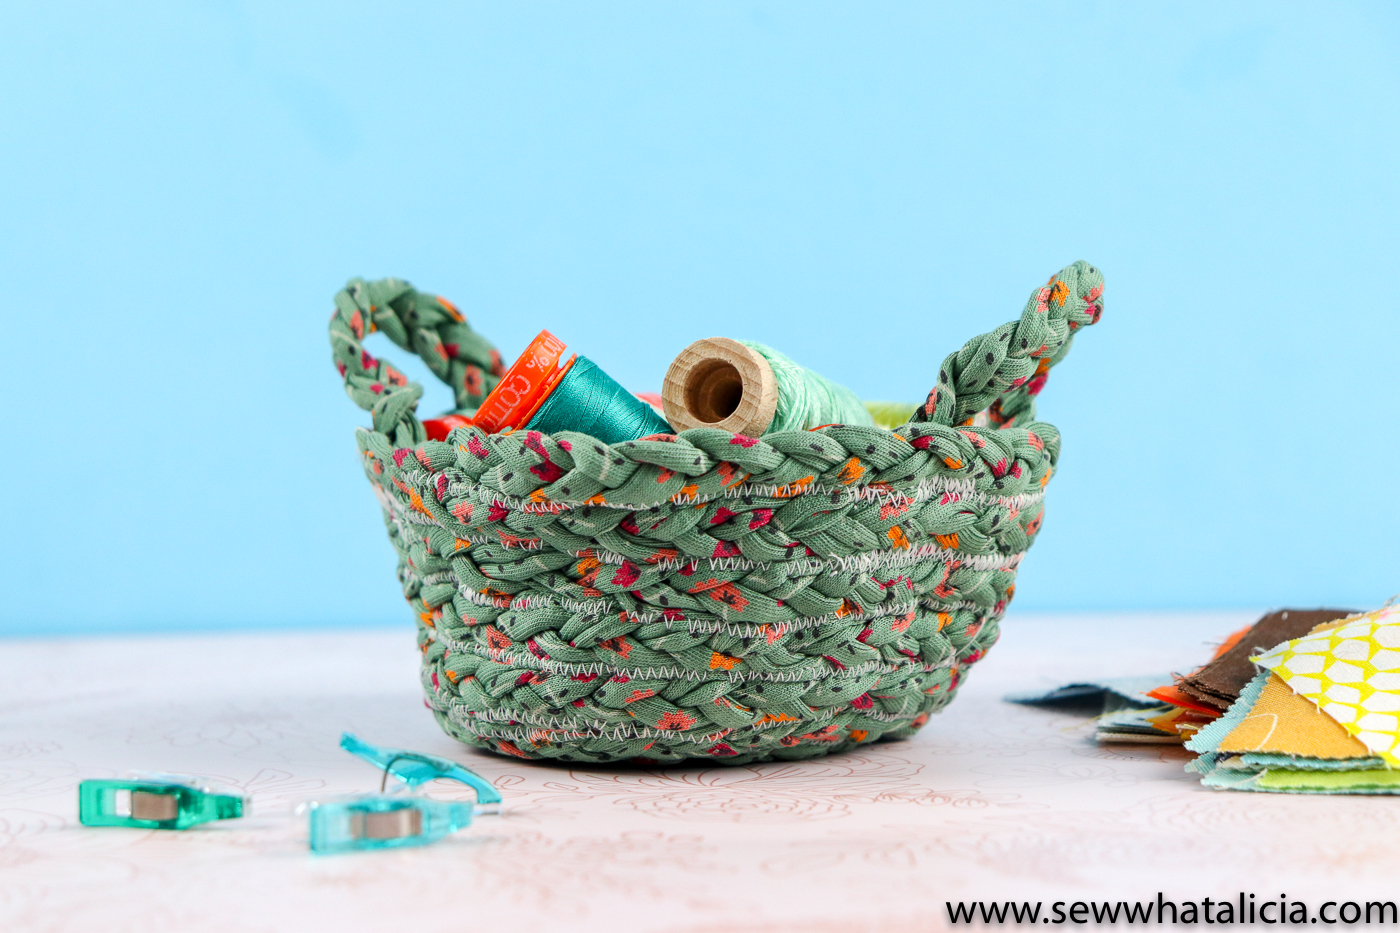 How to Make a T-Shirt Yarn Bowl: This t-shirt yarn is so fun to work with. It comes in so many patterns and these bowls are not hard to make. Click through for the pattern and supply links. | www.sewwhatalicia.com